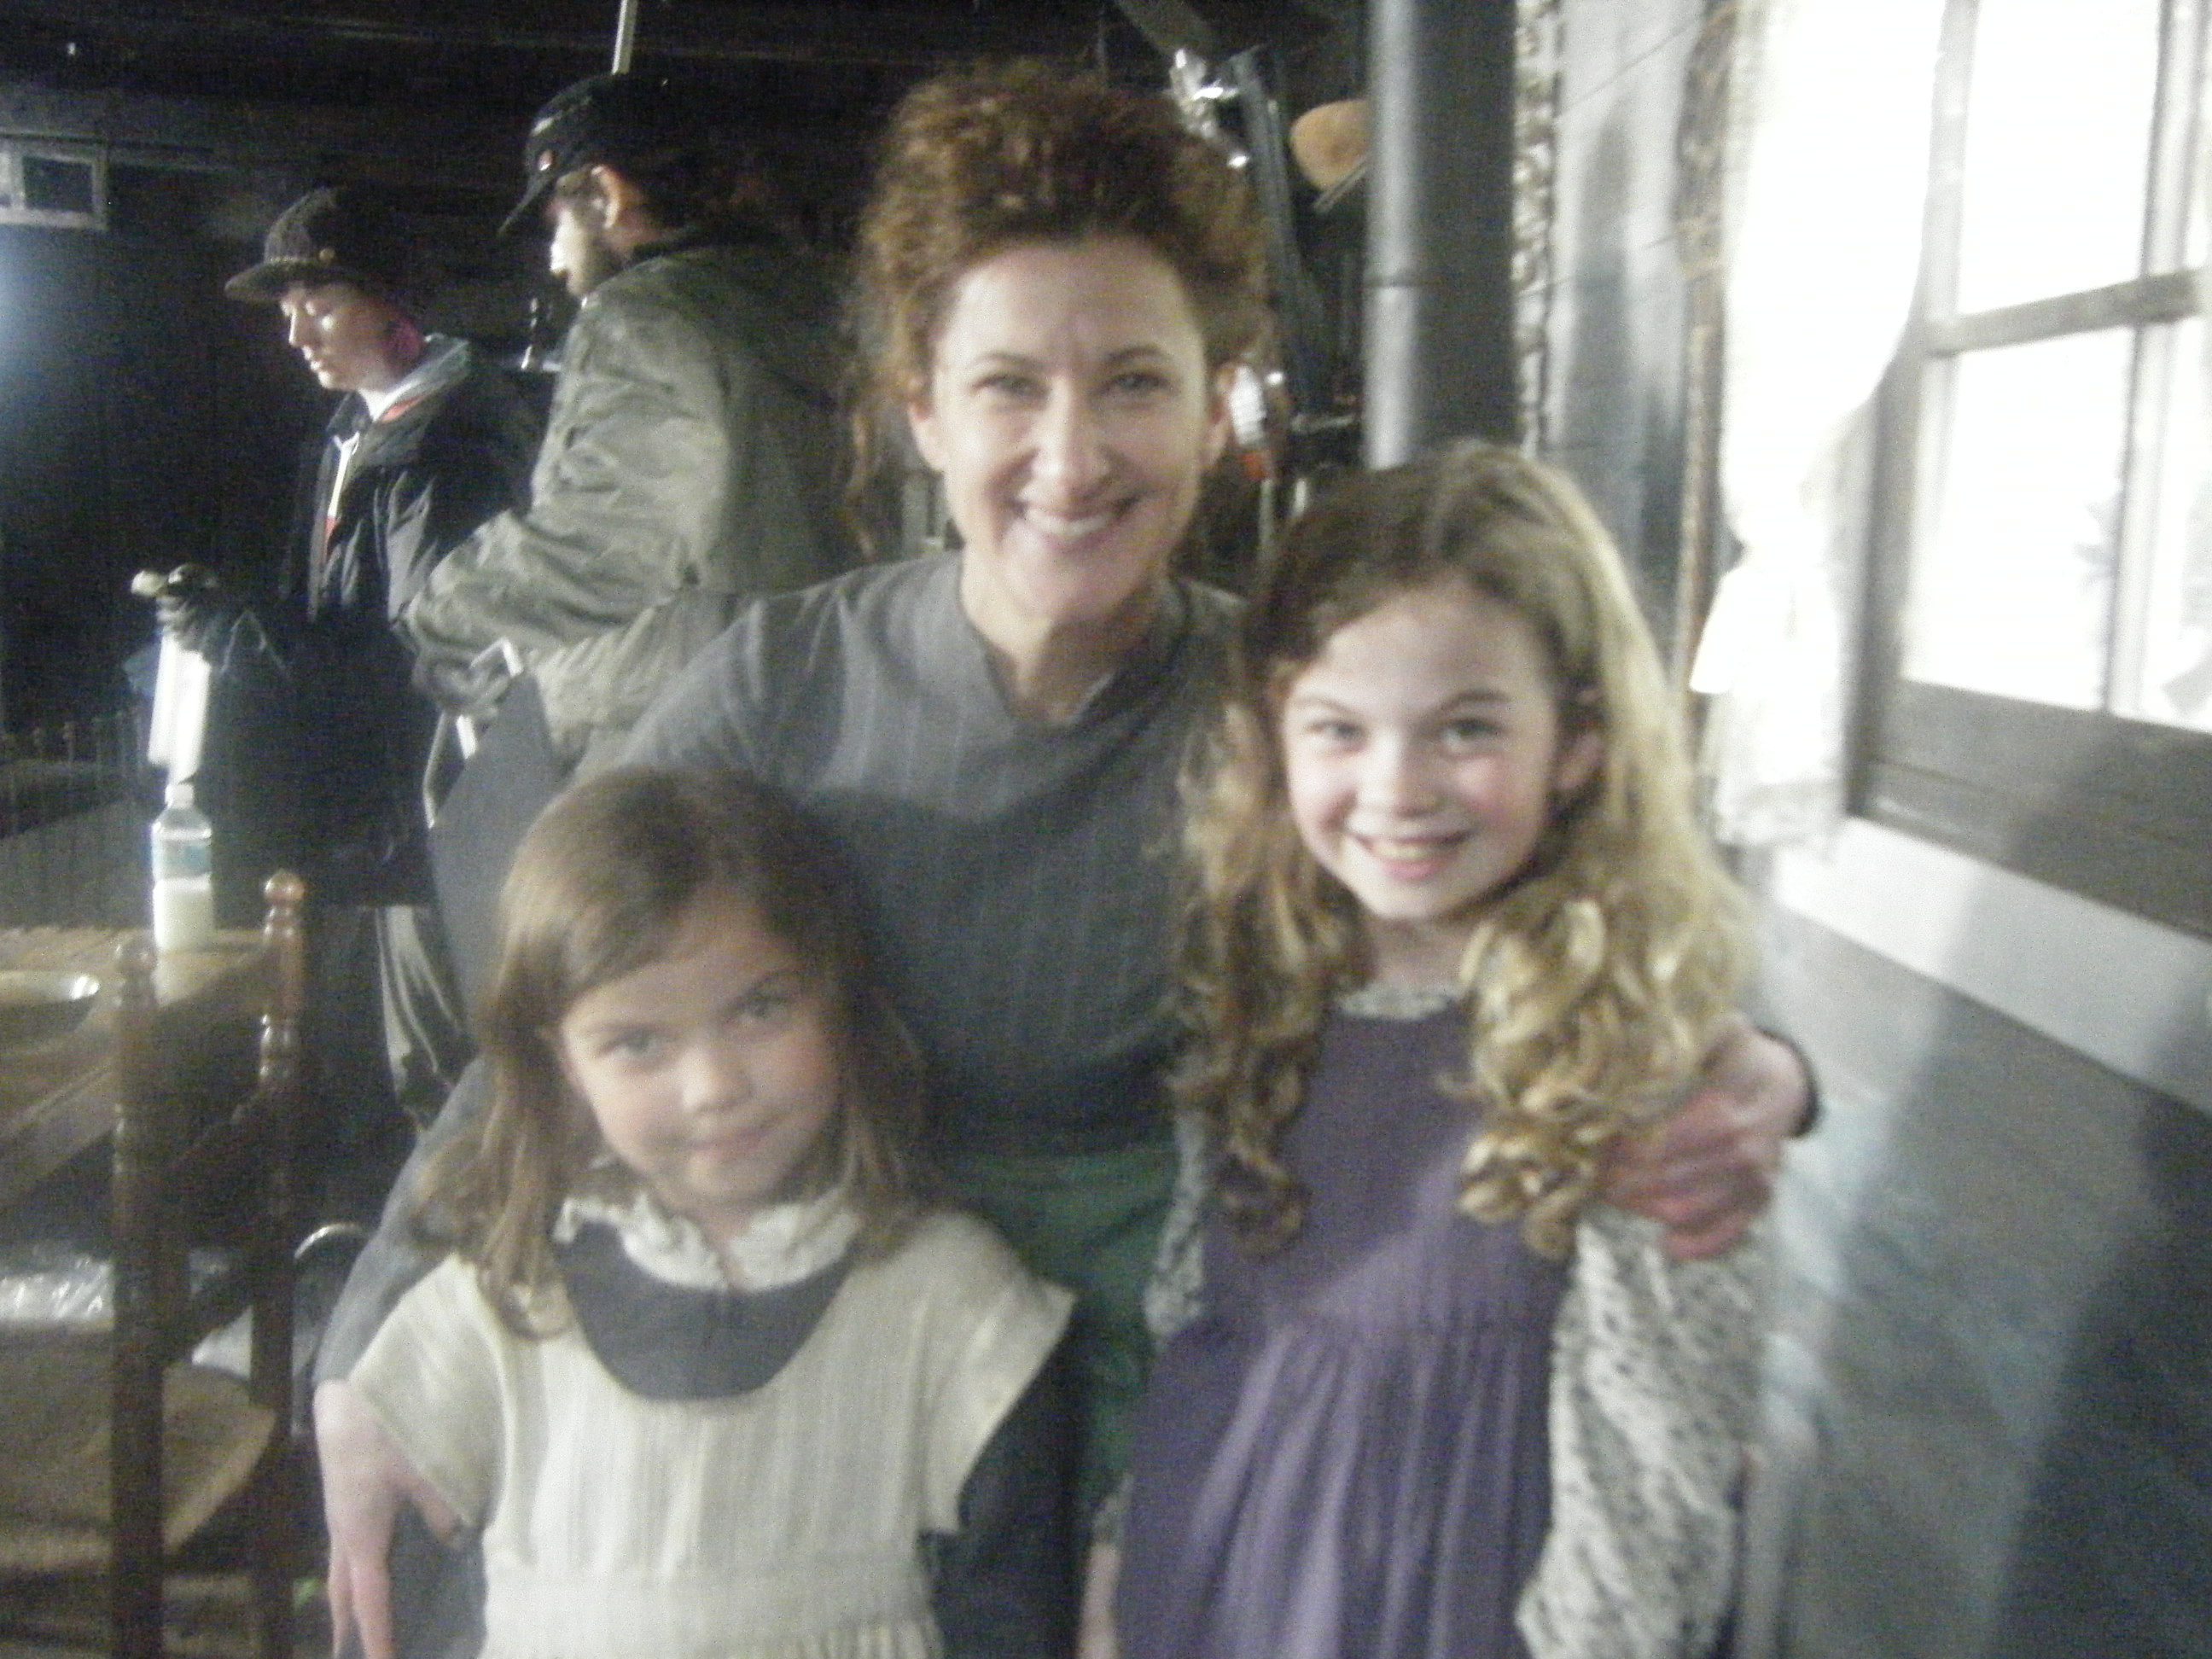 Megan with co-stars Jennifer Clement and Genea Charpentier on set of Into the Woods.